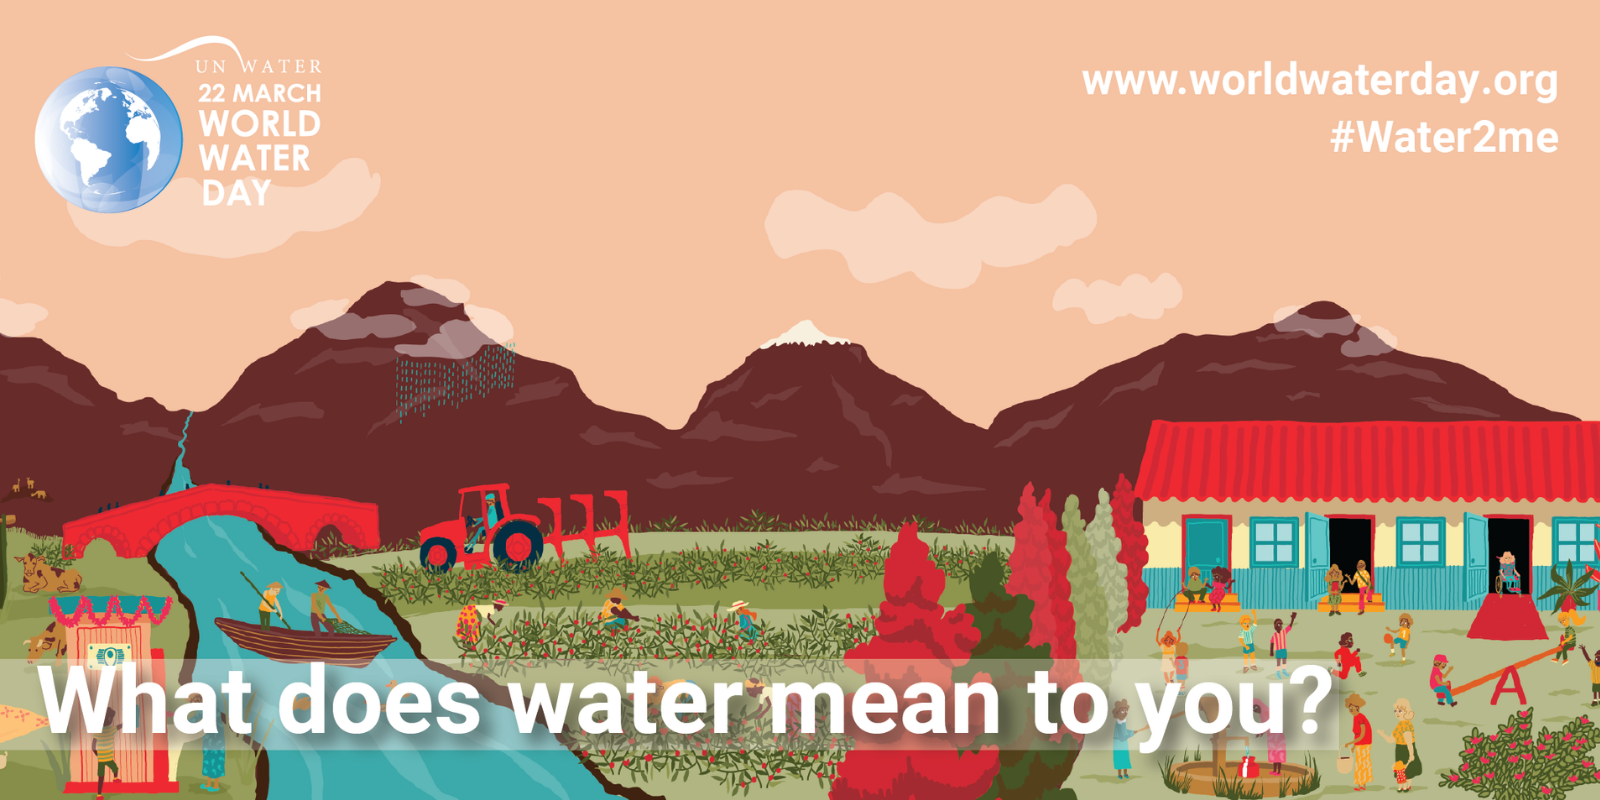 What does water mean to you?